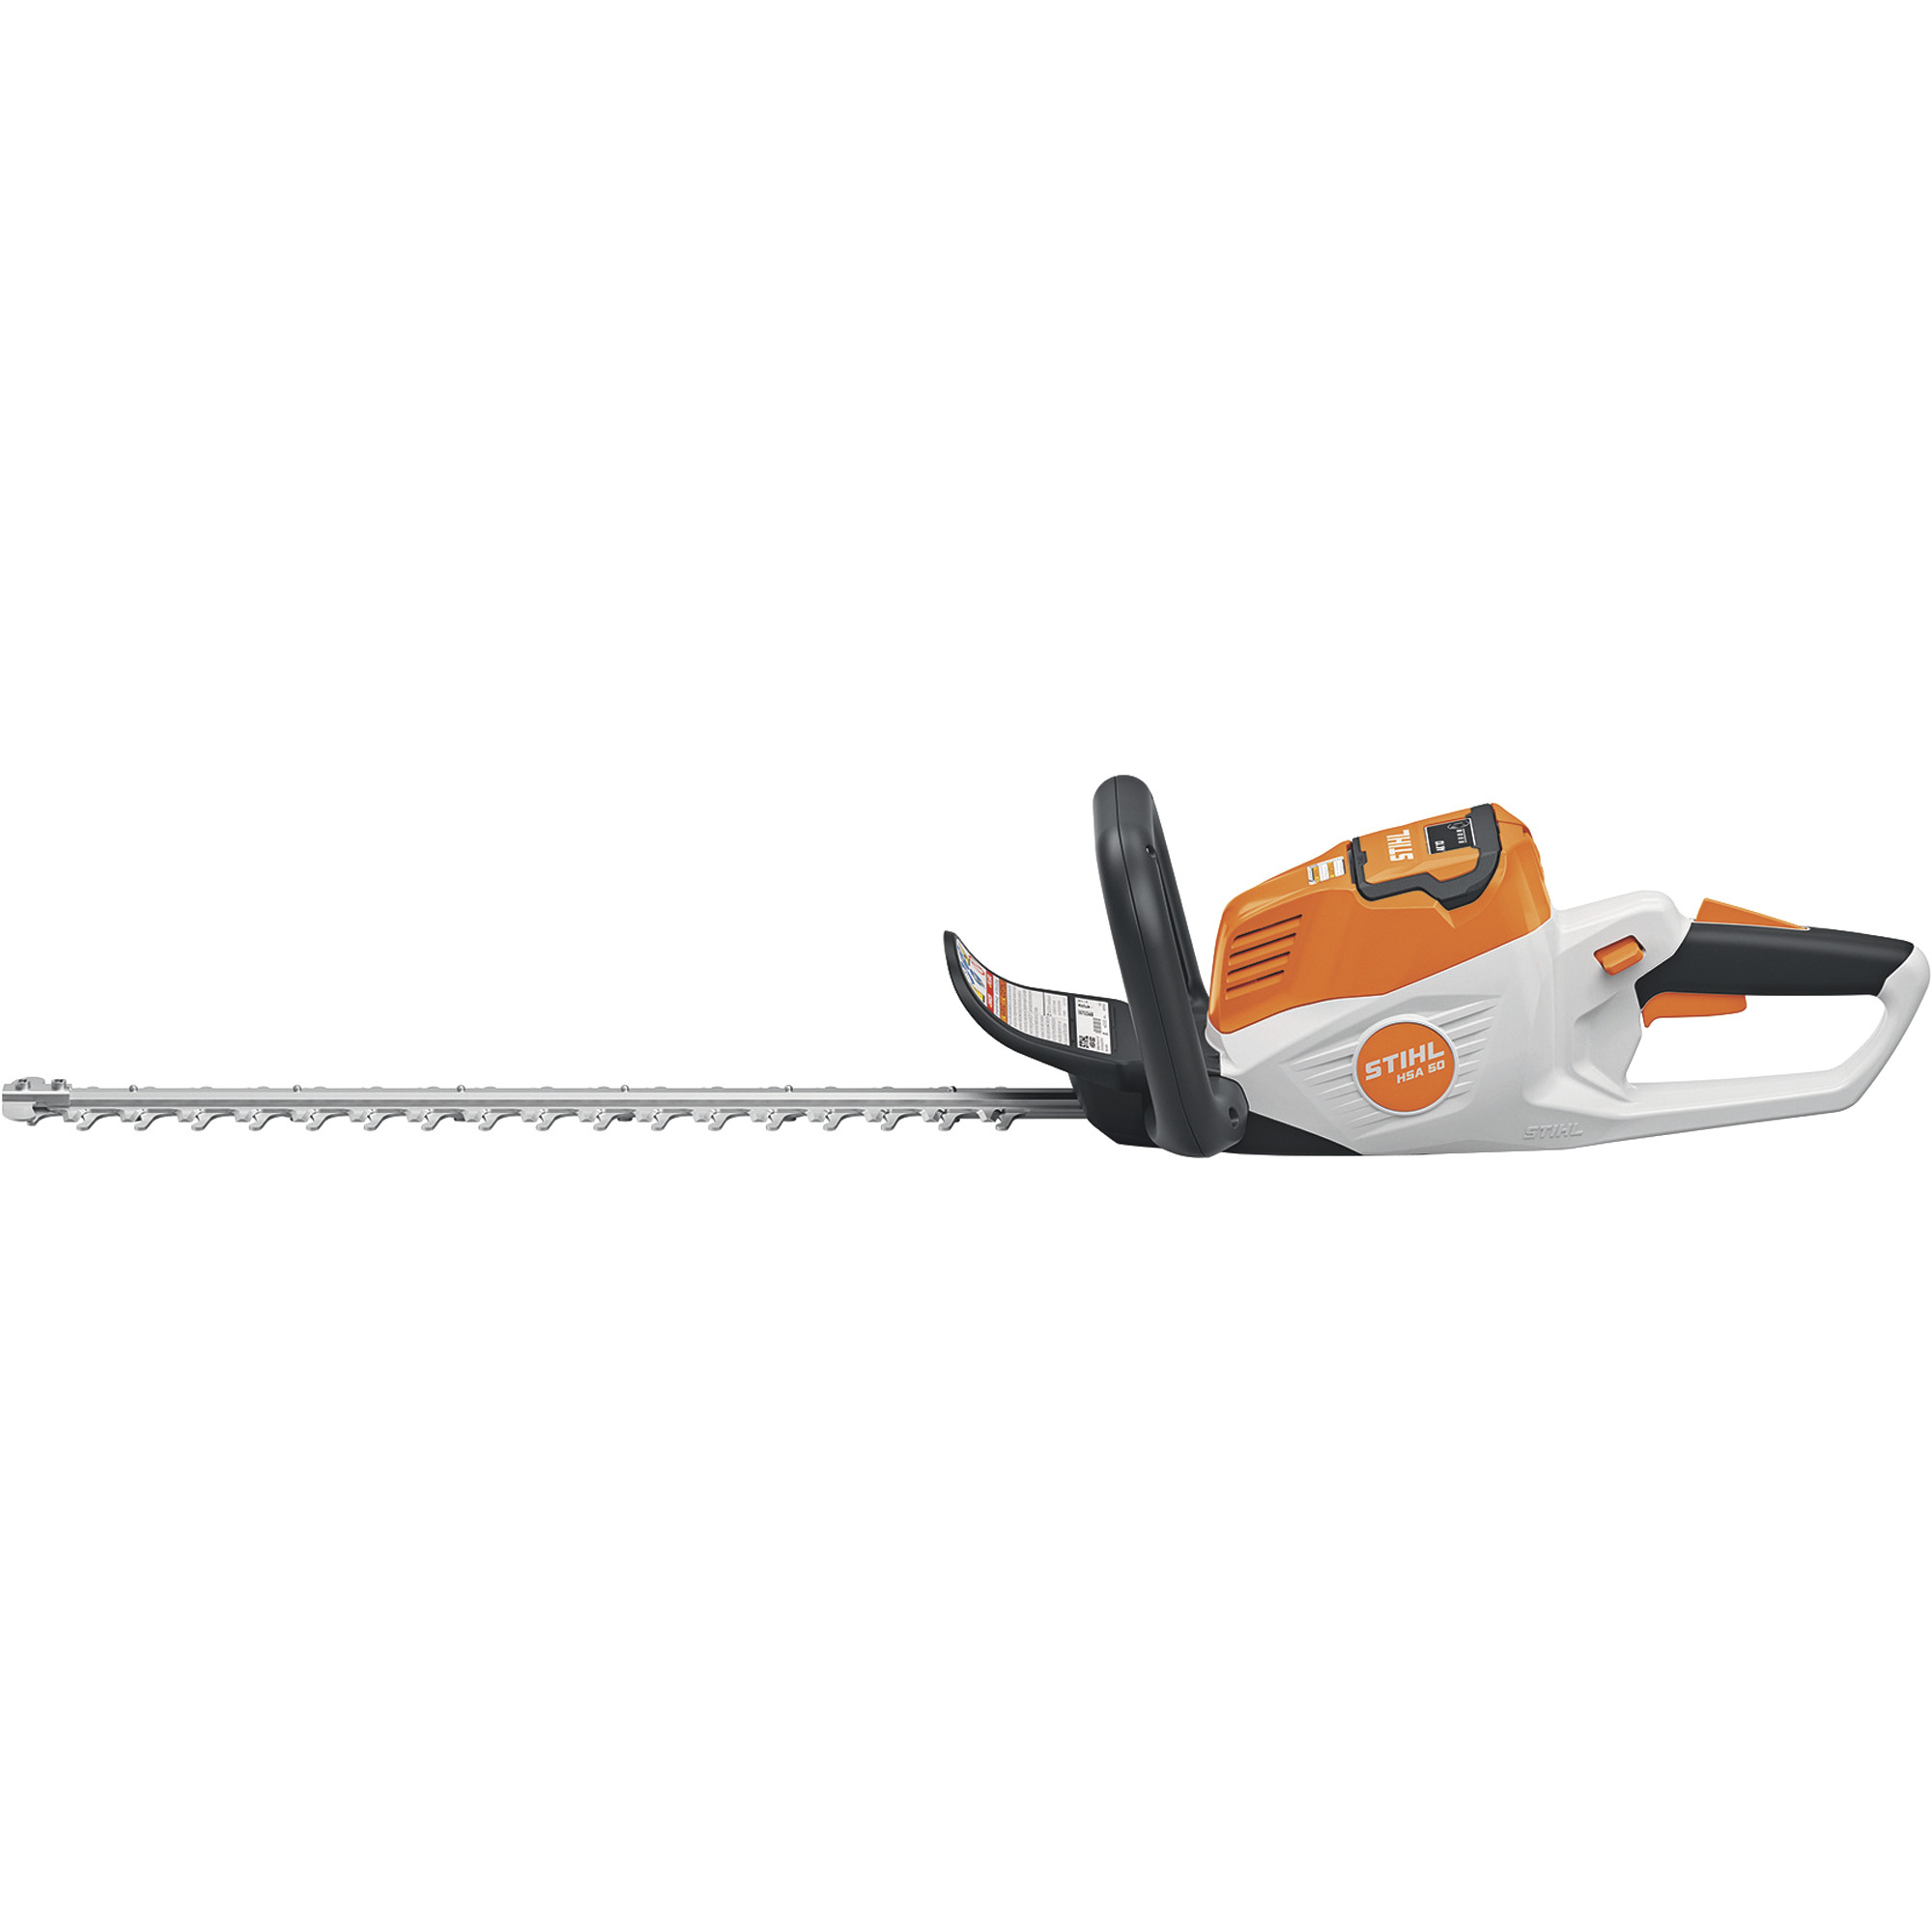 STIHL Battery-Operated 36 Volt Cordless Hedge Trimmer, 20Inch Blade, 36V Battery, Charger, Model HSA 50